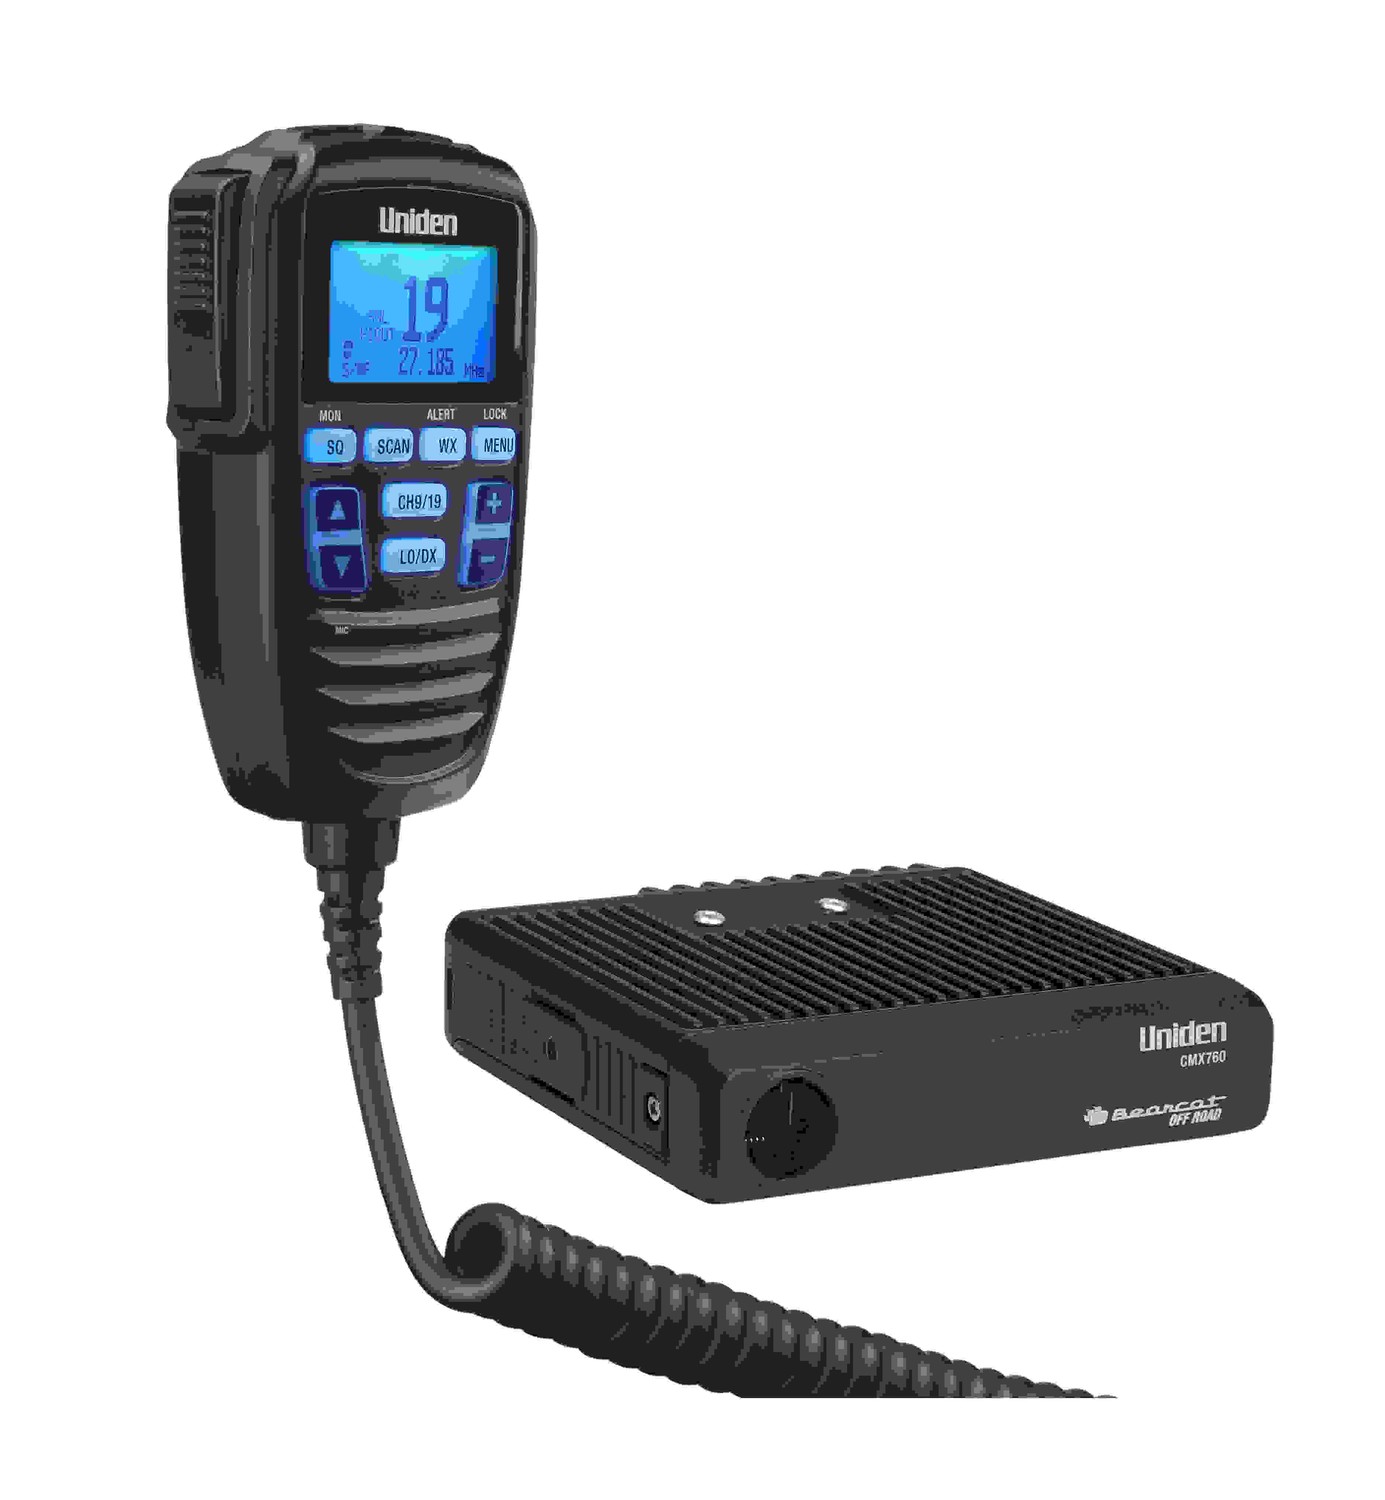 CMX760 Remote Mount Ultra Compact 40 Channel Off Road Professional Cb Radio With Weather + Alert, Scan, Local/Dx, Ch 9/19